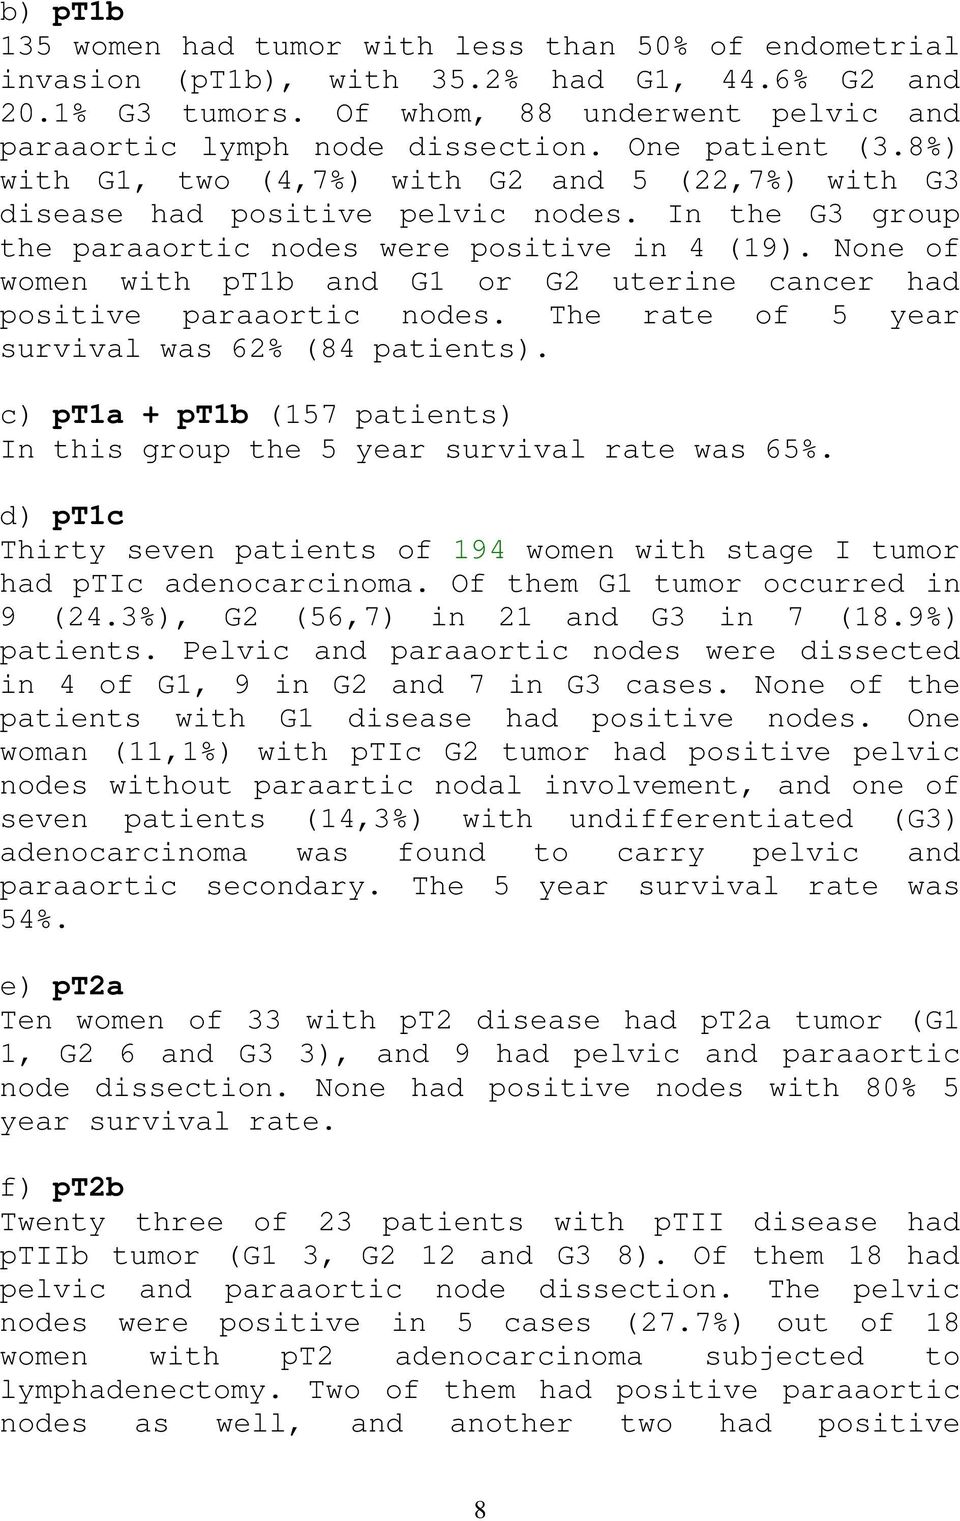 None of women with pt1b and G1 or G2 uterine cancer had positive paraaortic nodes. The rate of 5 year survival was 62% (84 patients).